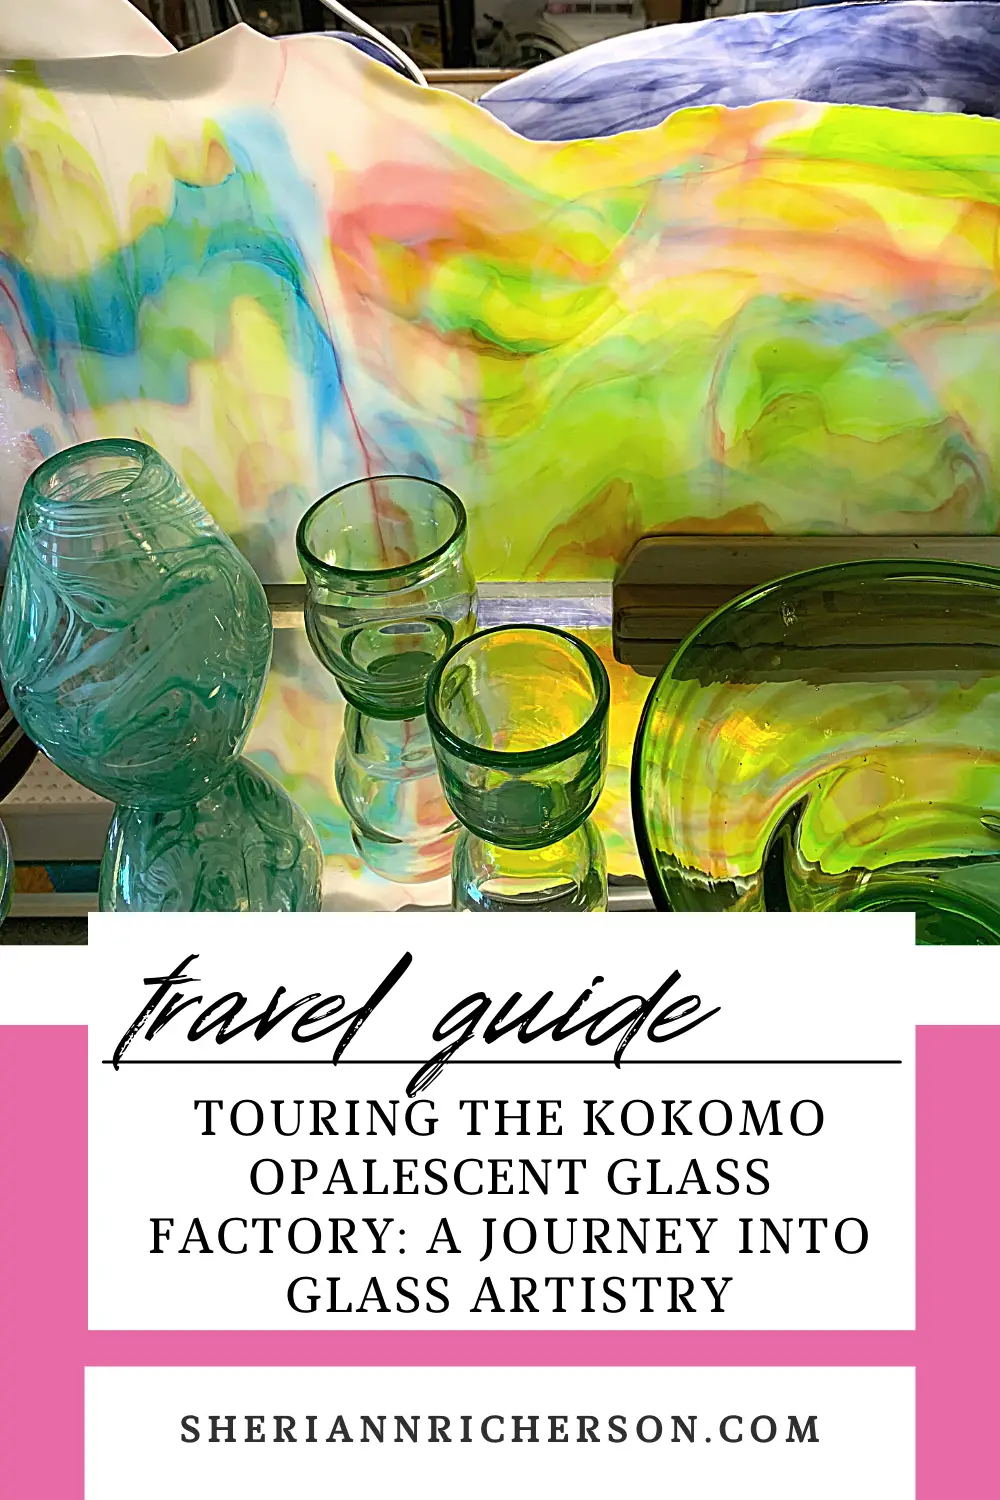 Stained glass and blown glass cups and vases.